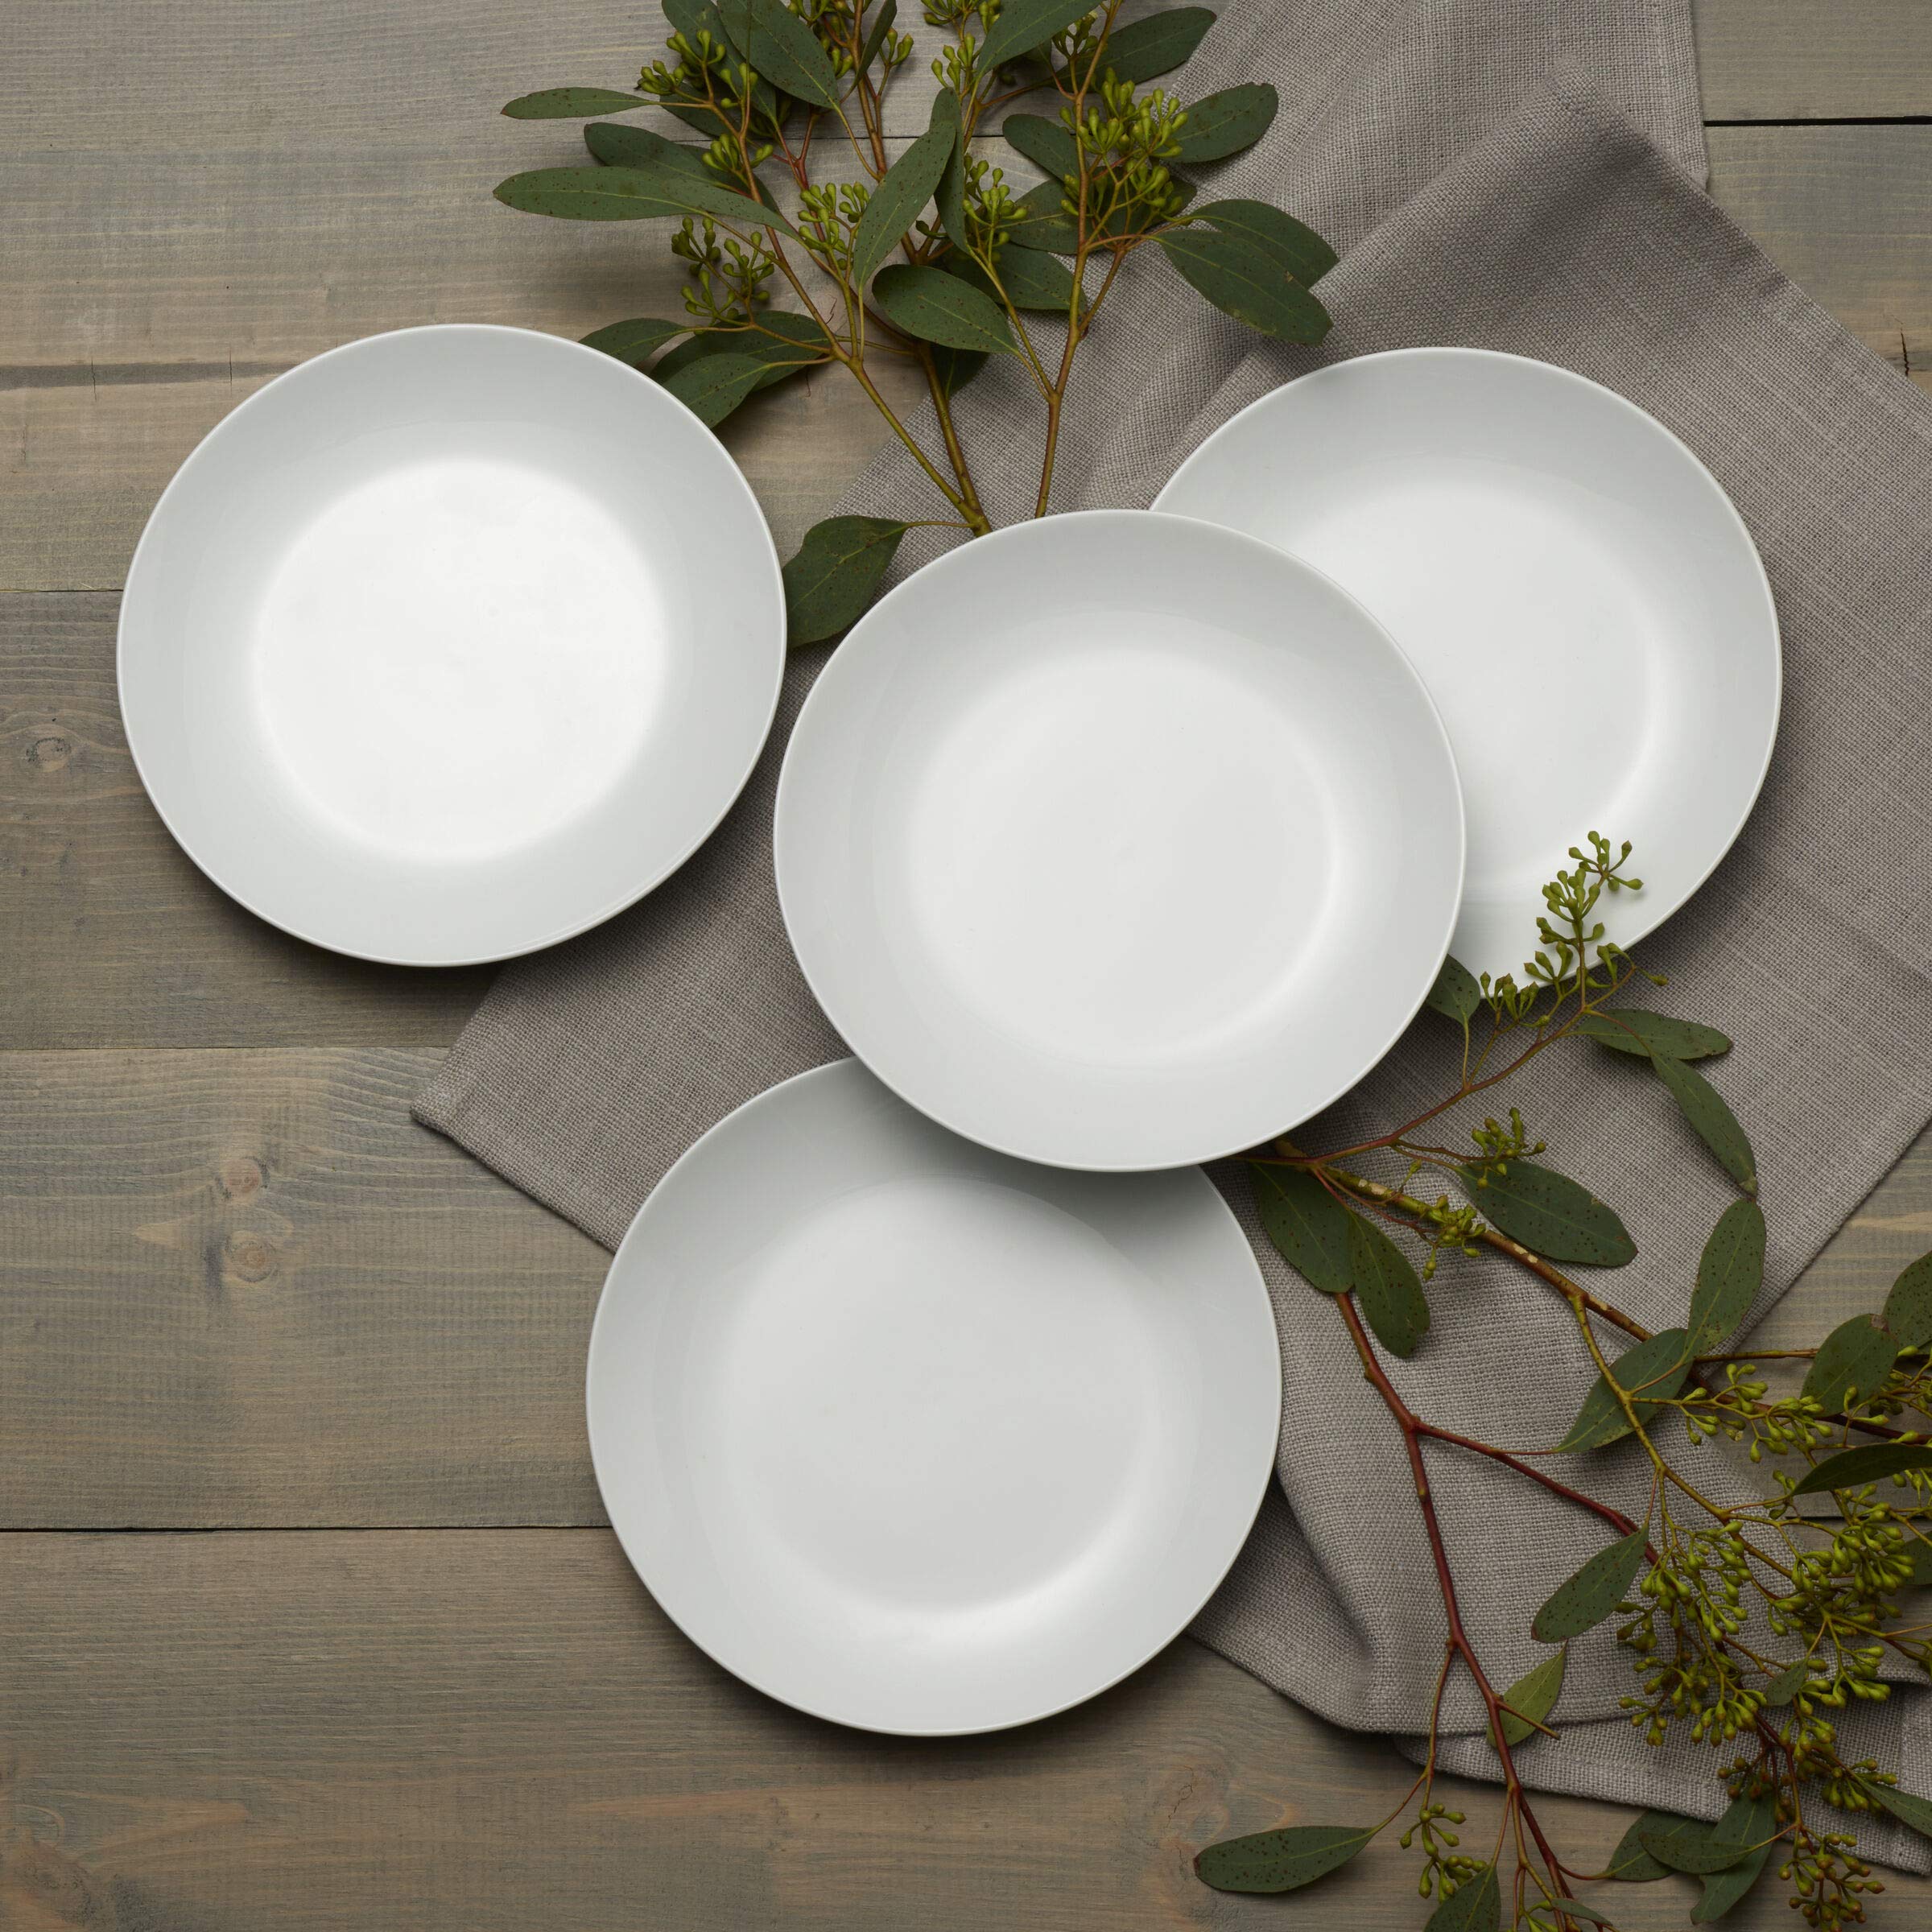 Everyday White by Fitz and Floyd Coupe 7.75 Inch Salad Plates, Set of 4